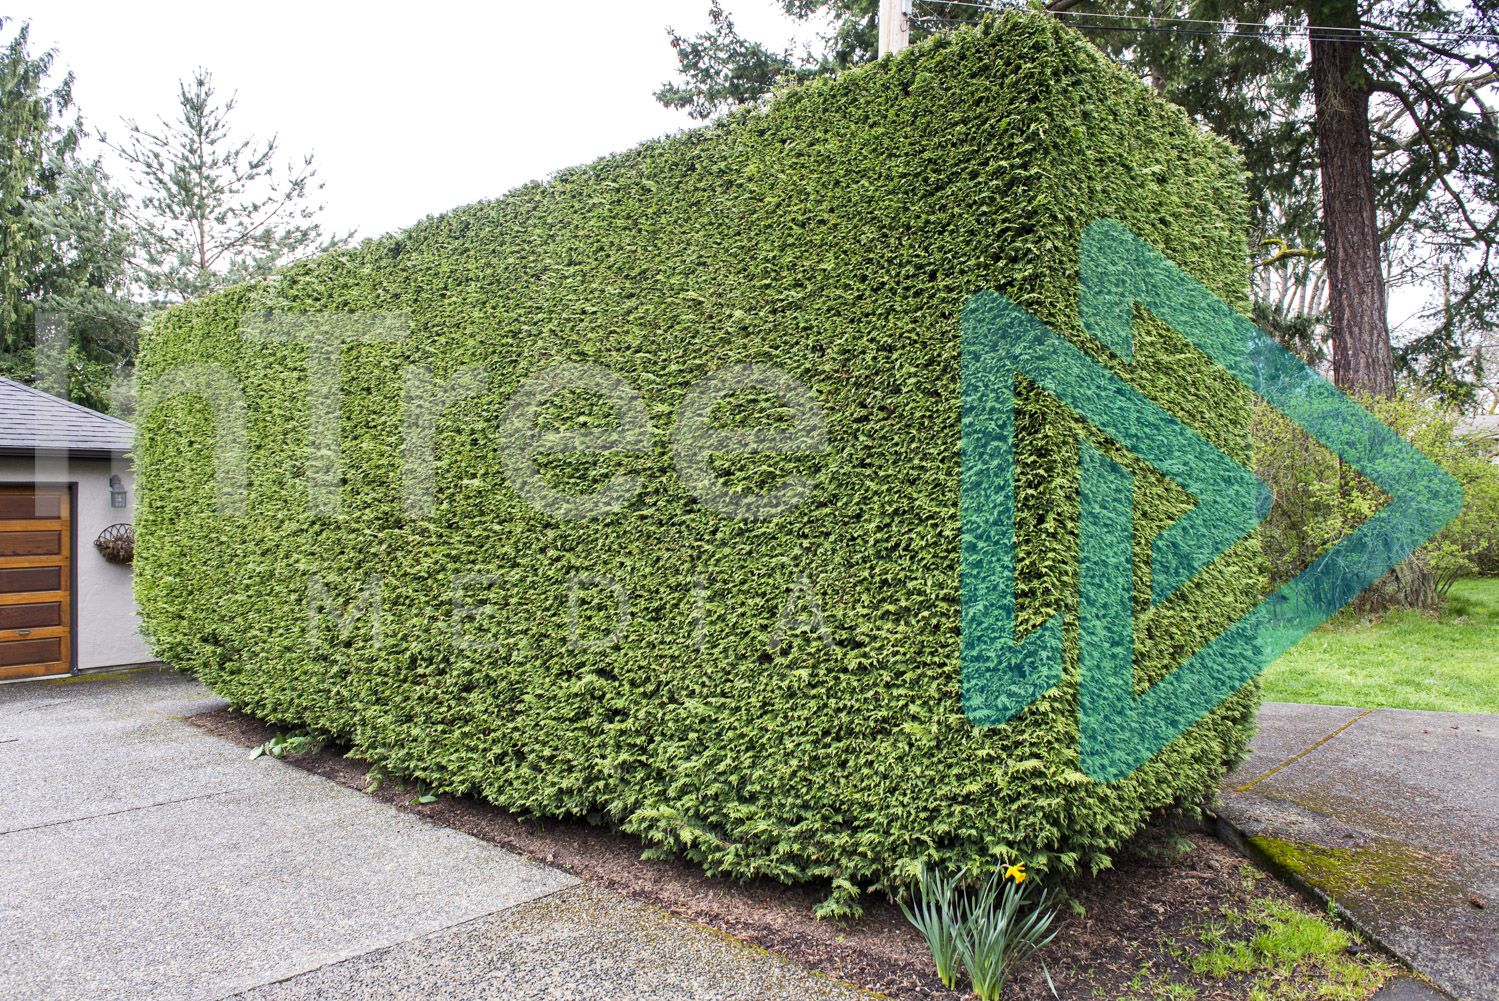 Neatly-trimmed-hedge-in-driveway-InTree-arborist-image-001-5734